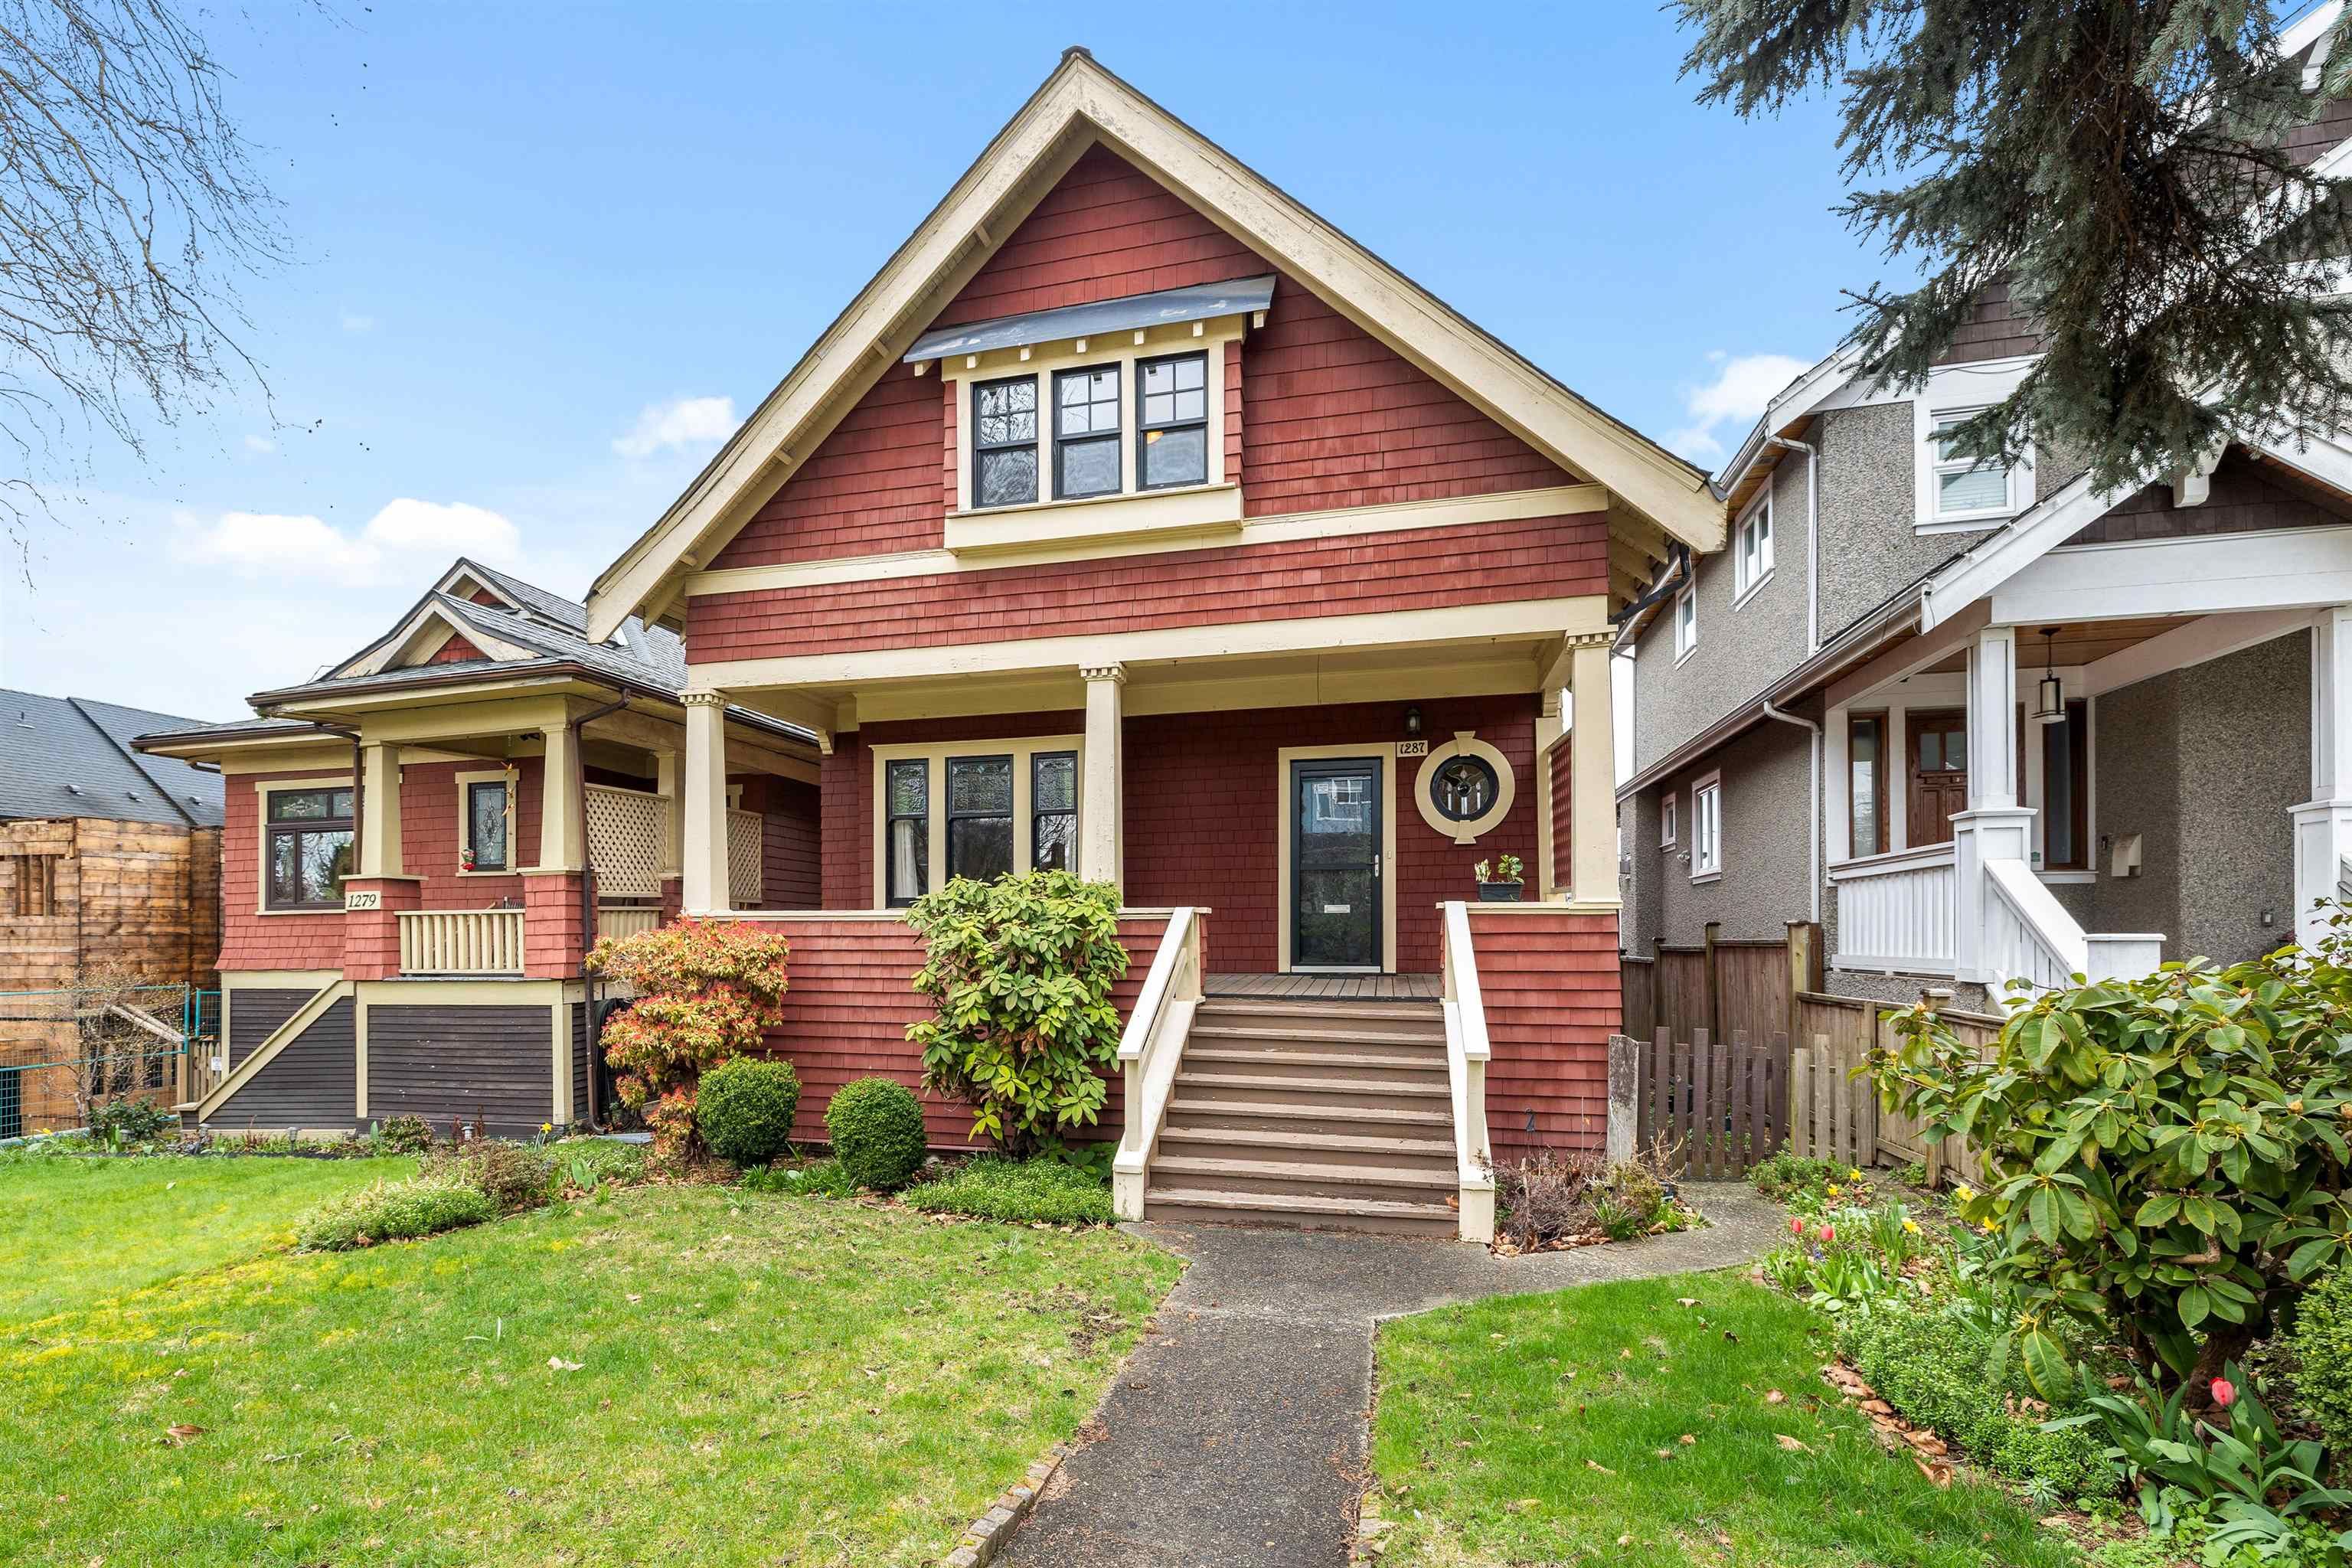 Property Sold by Our Office at 1287 28TH AVE E in Vancouver